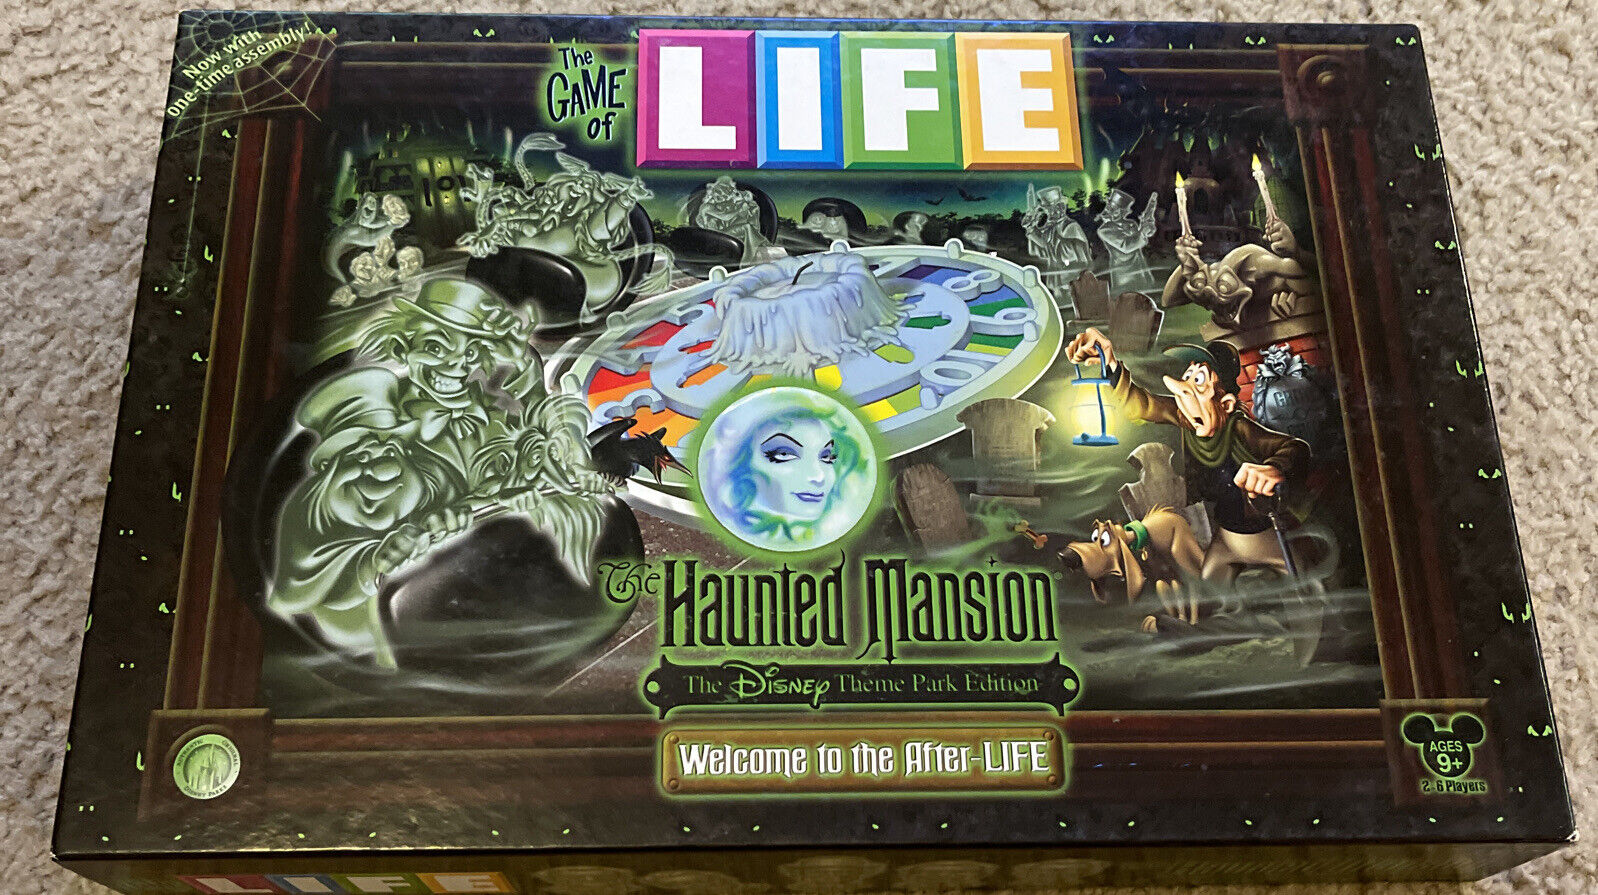 2009 The Game of LIFE The Haunted Mansion Disney Theme Park Edition complete